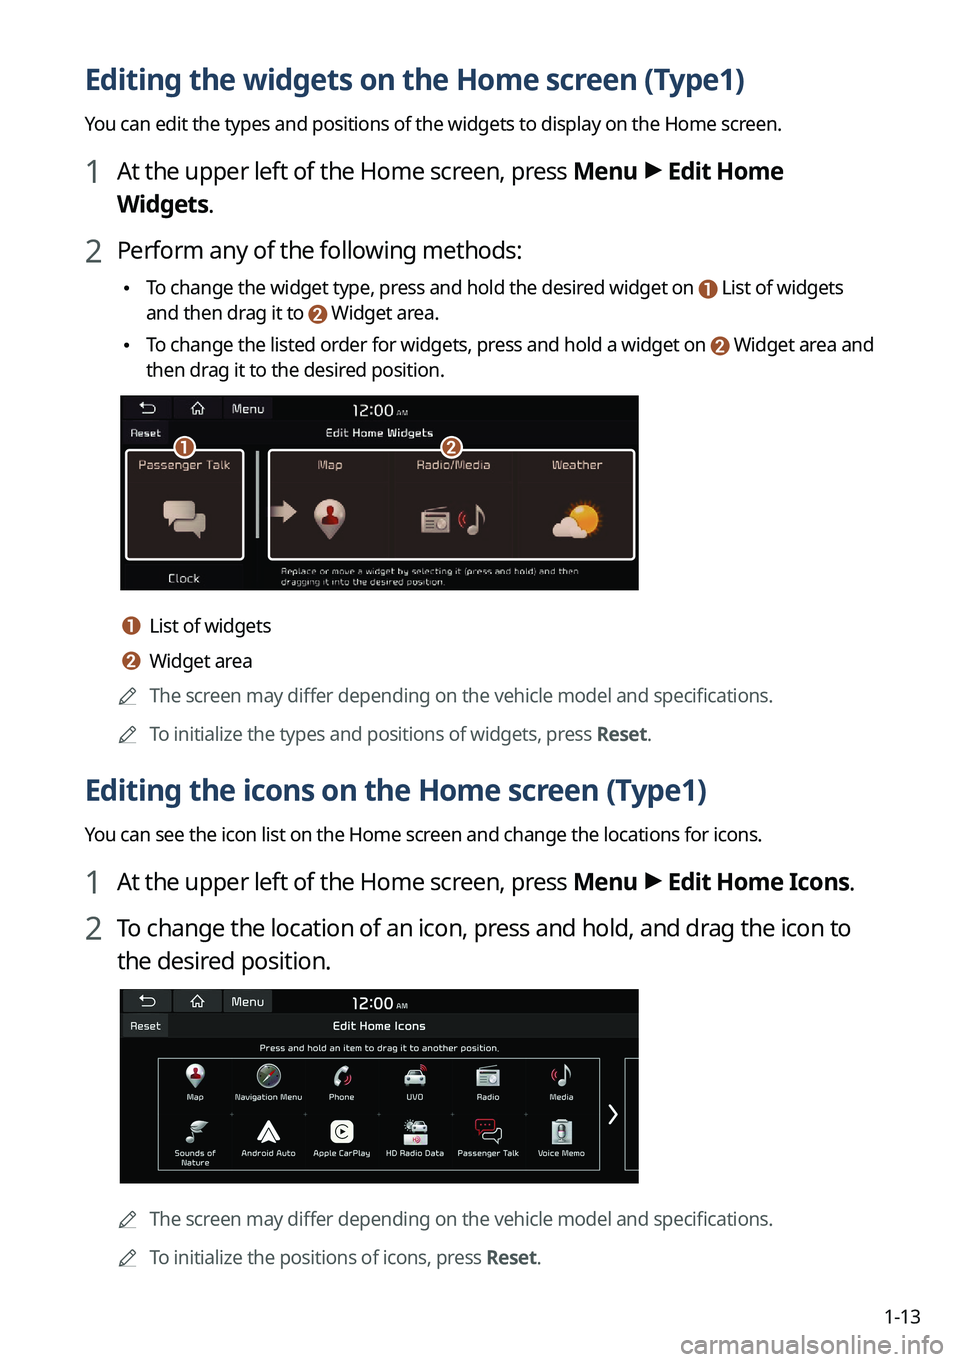 KIA SORENTO 2022  Navigation System Quick Reference Guide 1-13
Editing the widgets on the Home screen (Type1)
You can edit the types and positions of the widgets to display on the Home screen.
1 At the upper left of the Home screen, press Menu >
 Edit Home 
